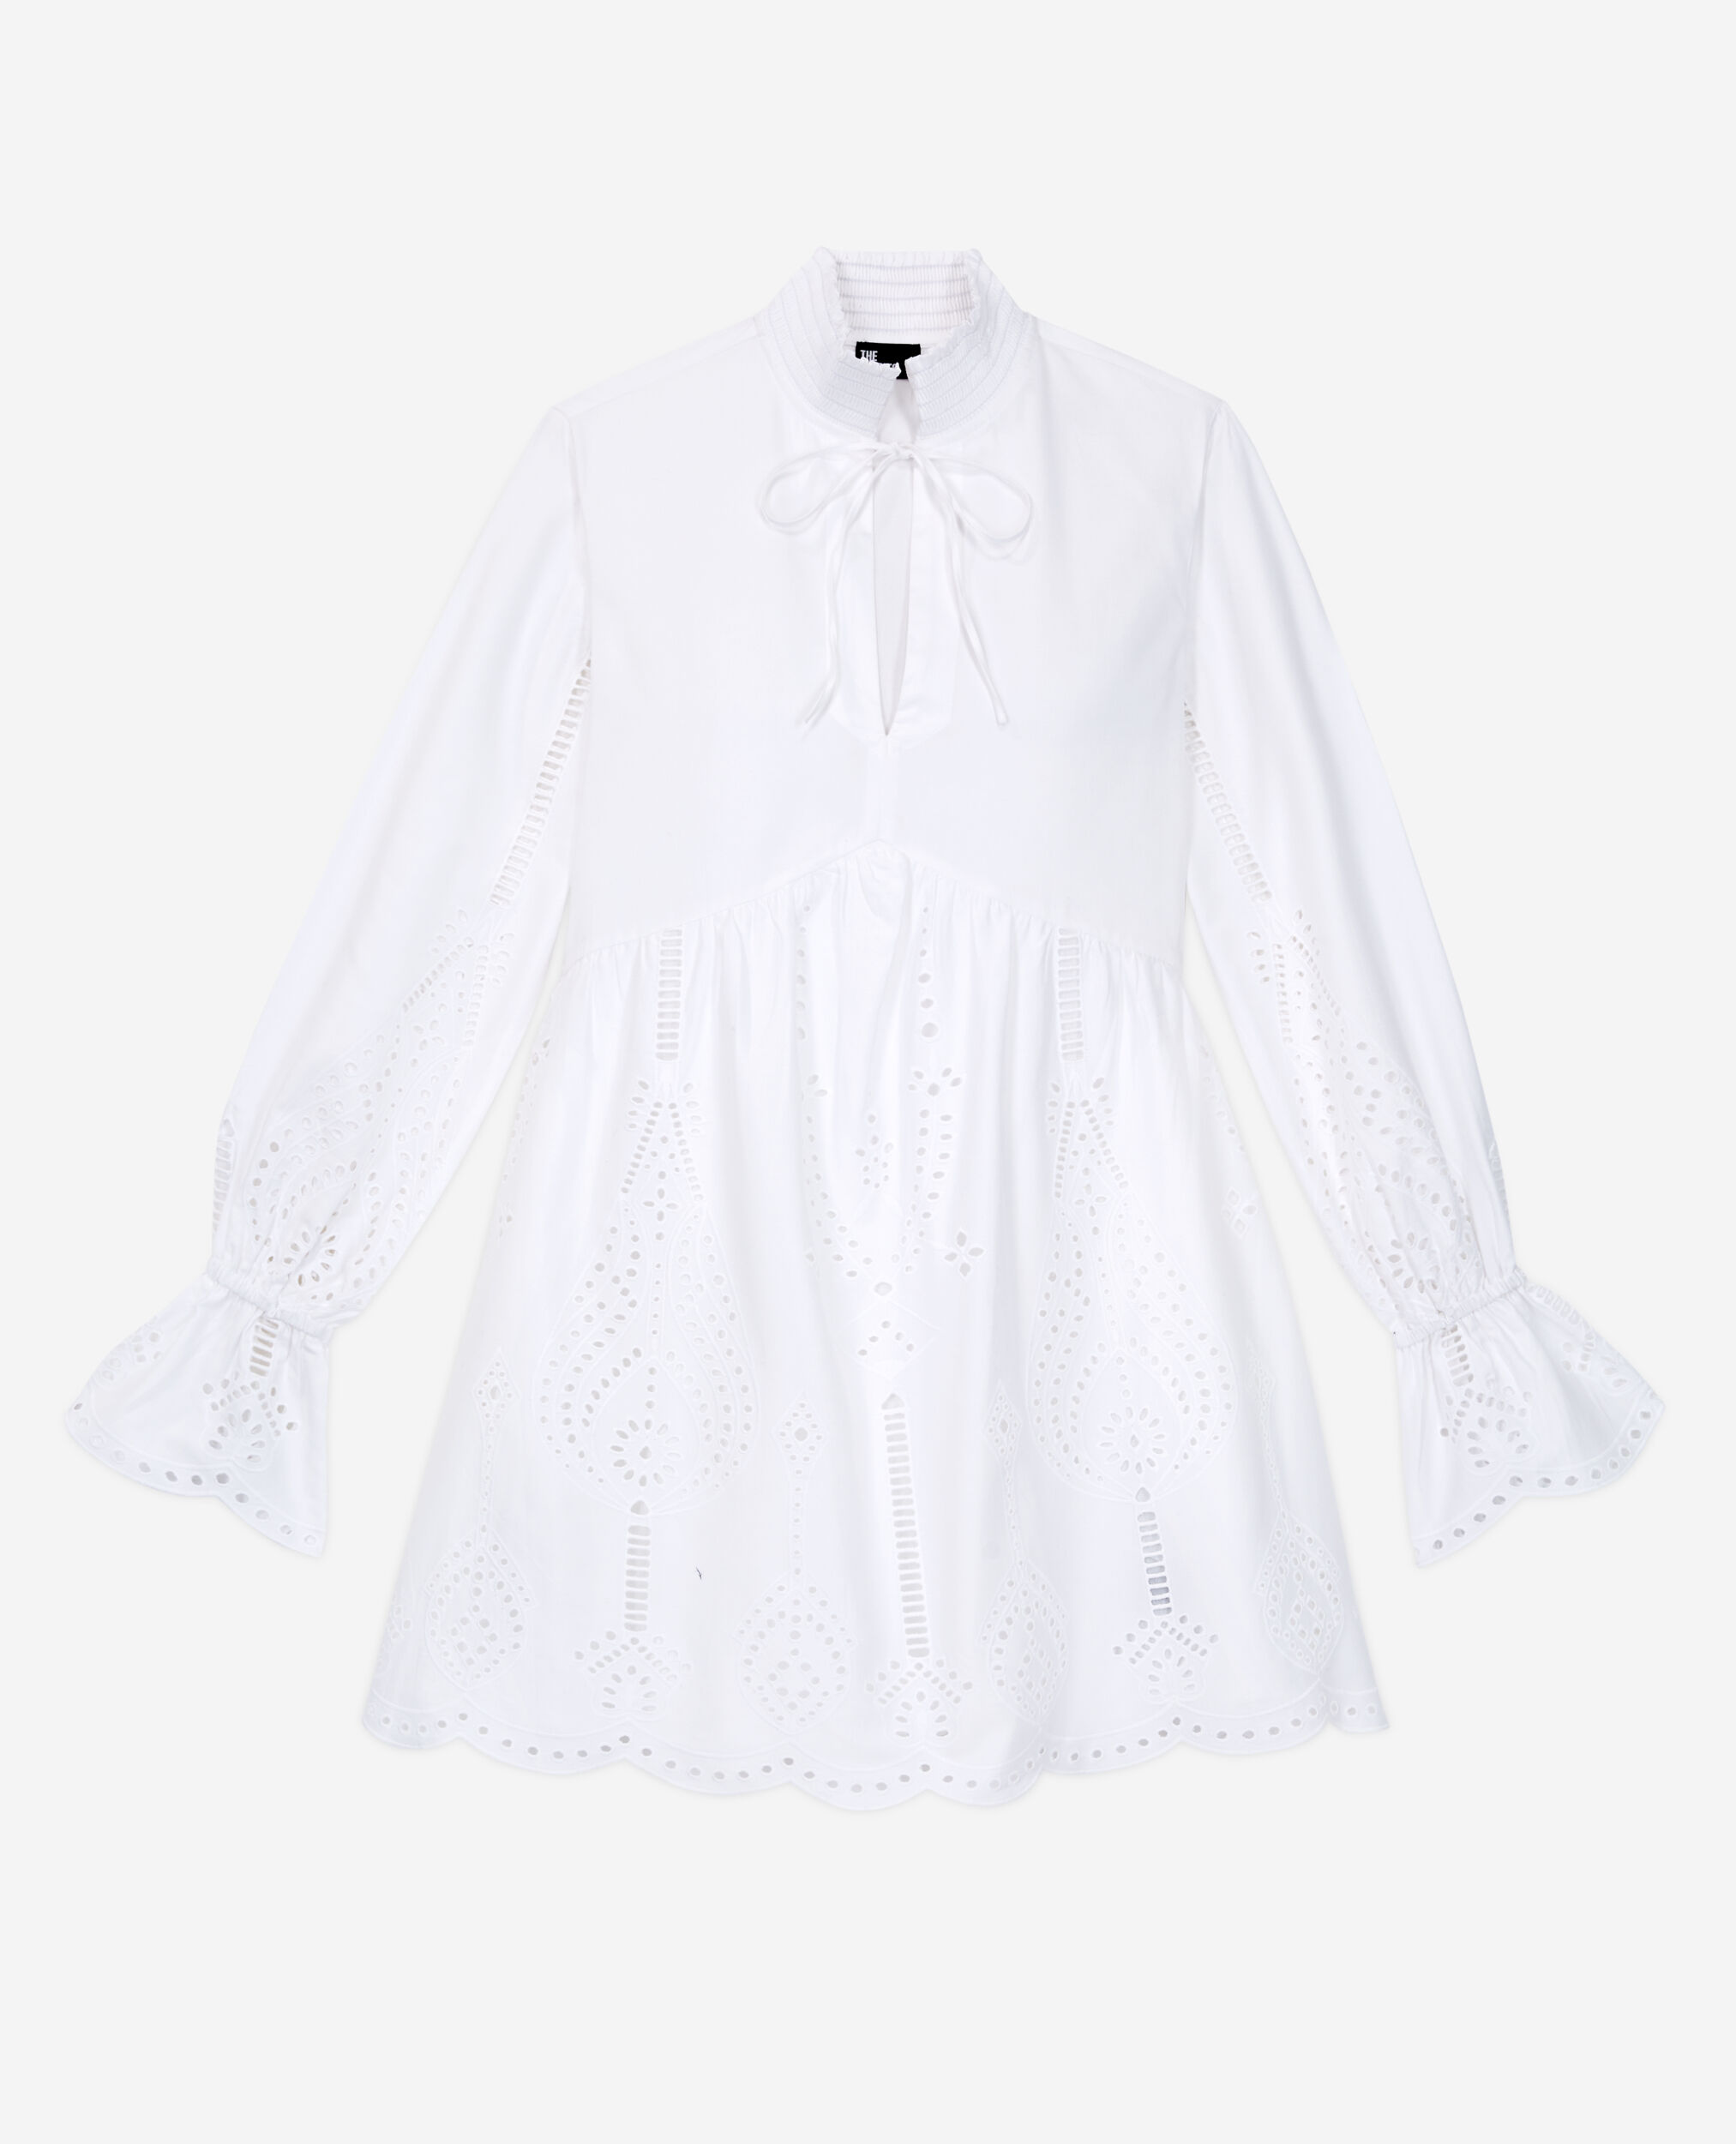 Robe courte blanche avec broderie Anglaise, WHITE, hi-res image number null